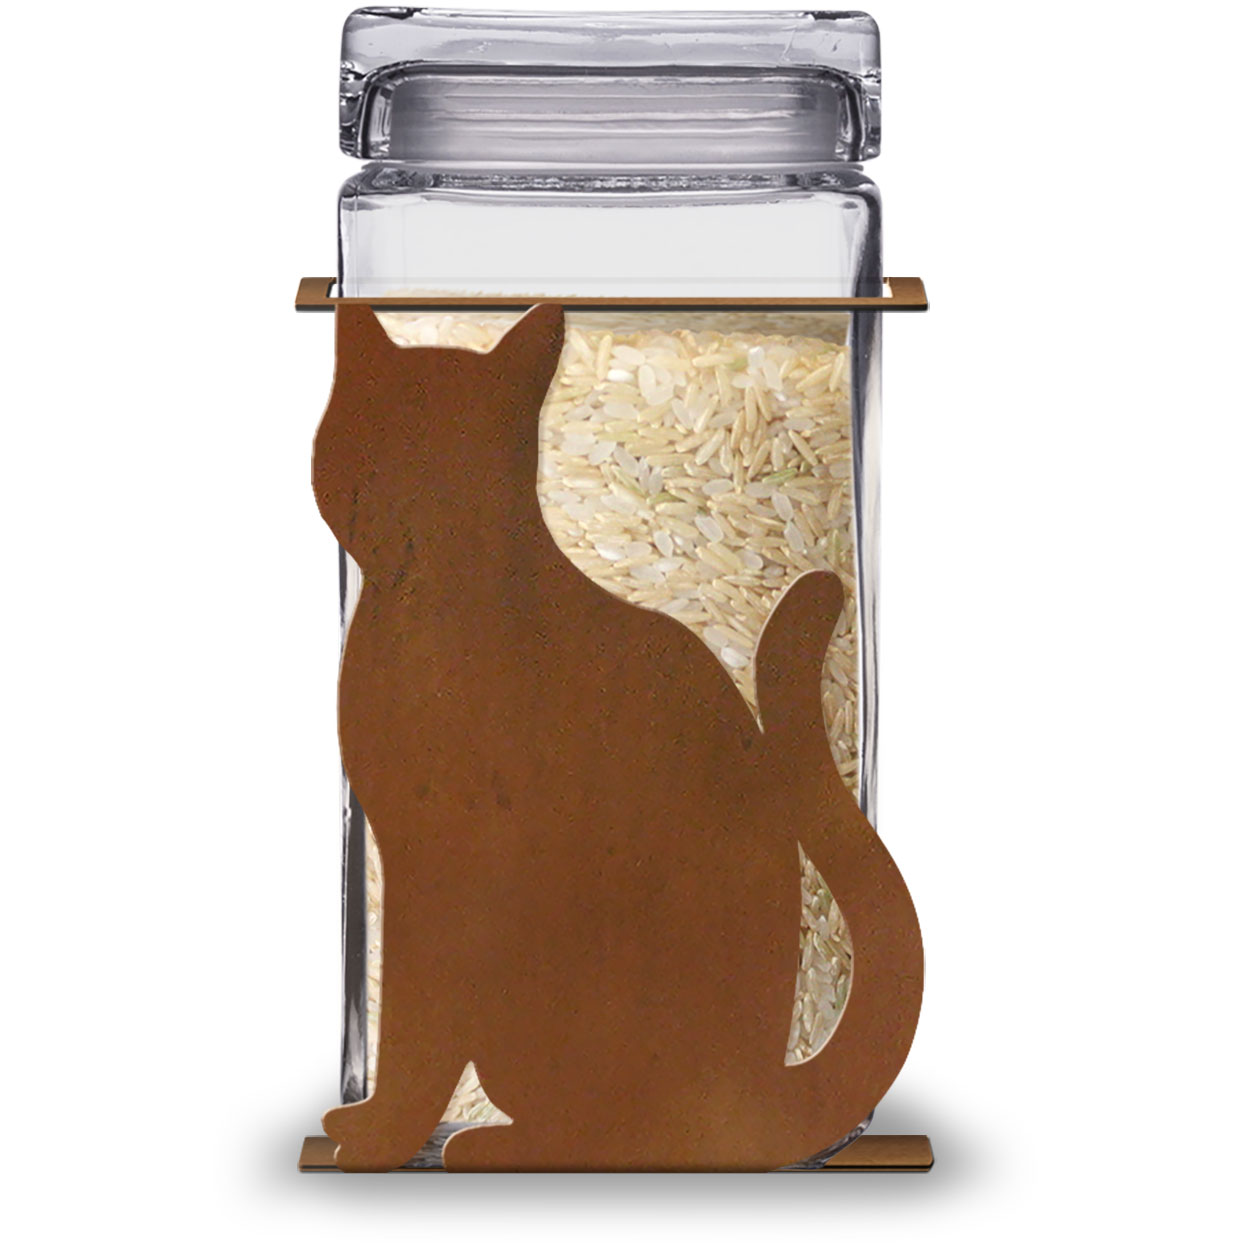 620013R - Sitting Cat 2-Quart Glass and Metal Canister in Rust Patina